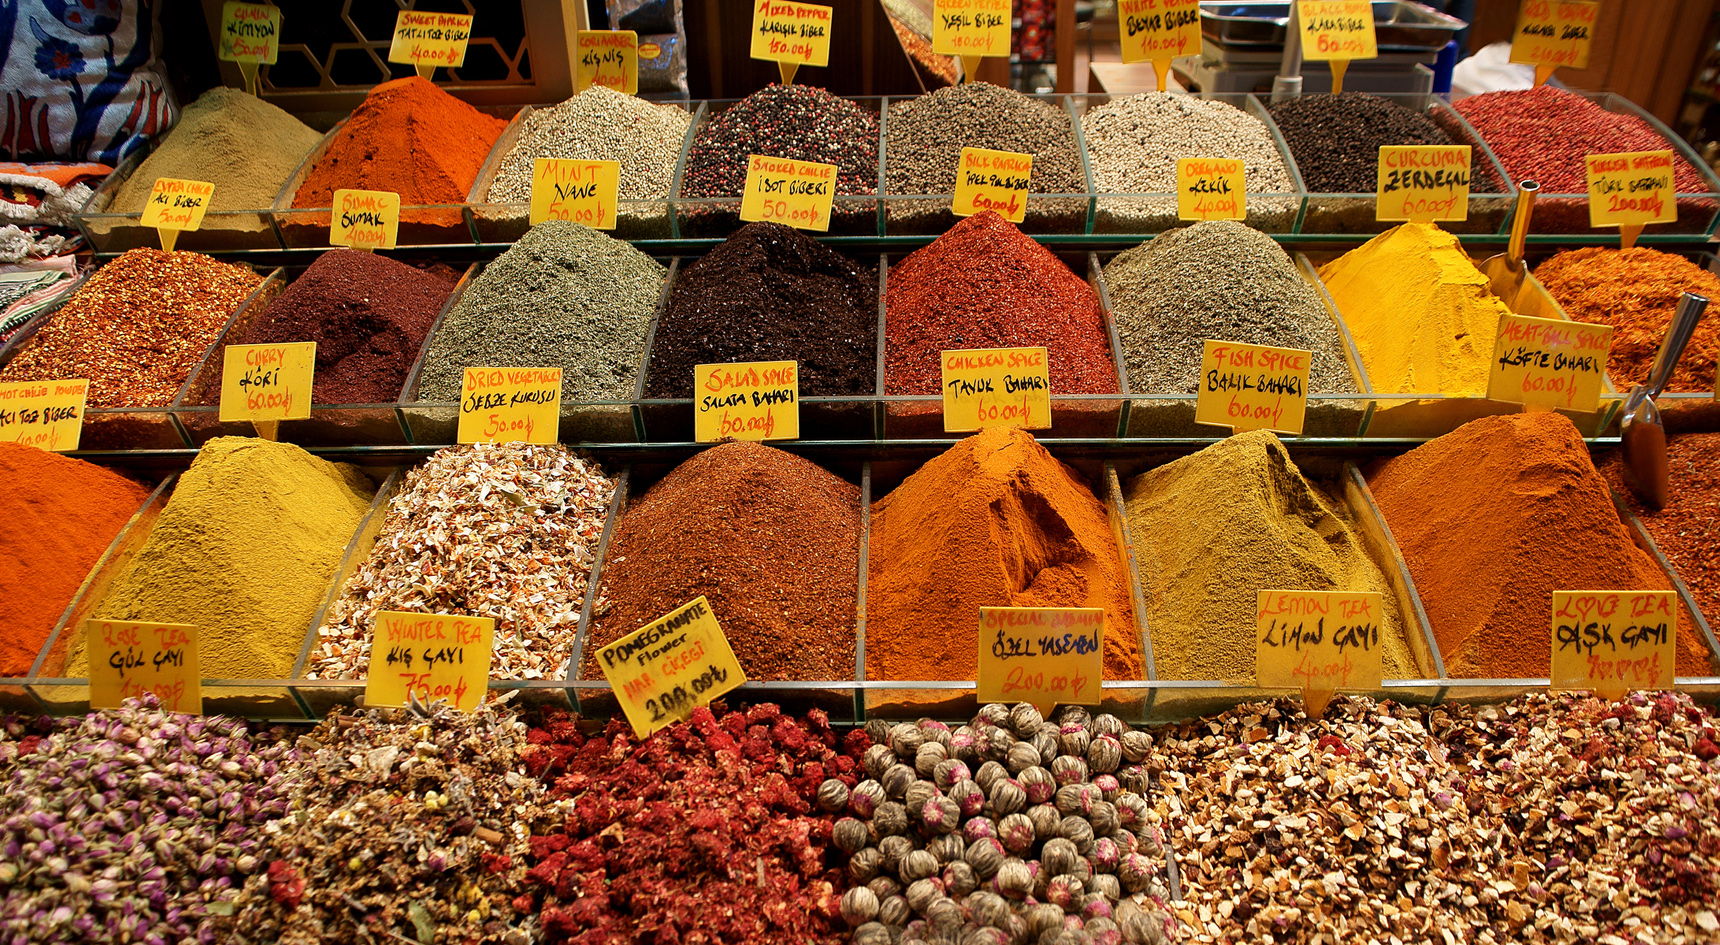 Piles of spices stacked up in at the Egyptian Market in Istanbul.